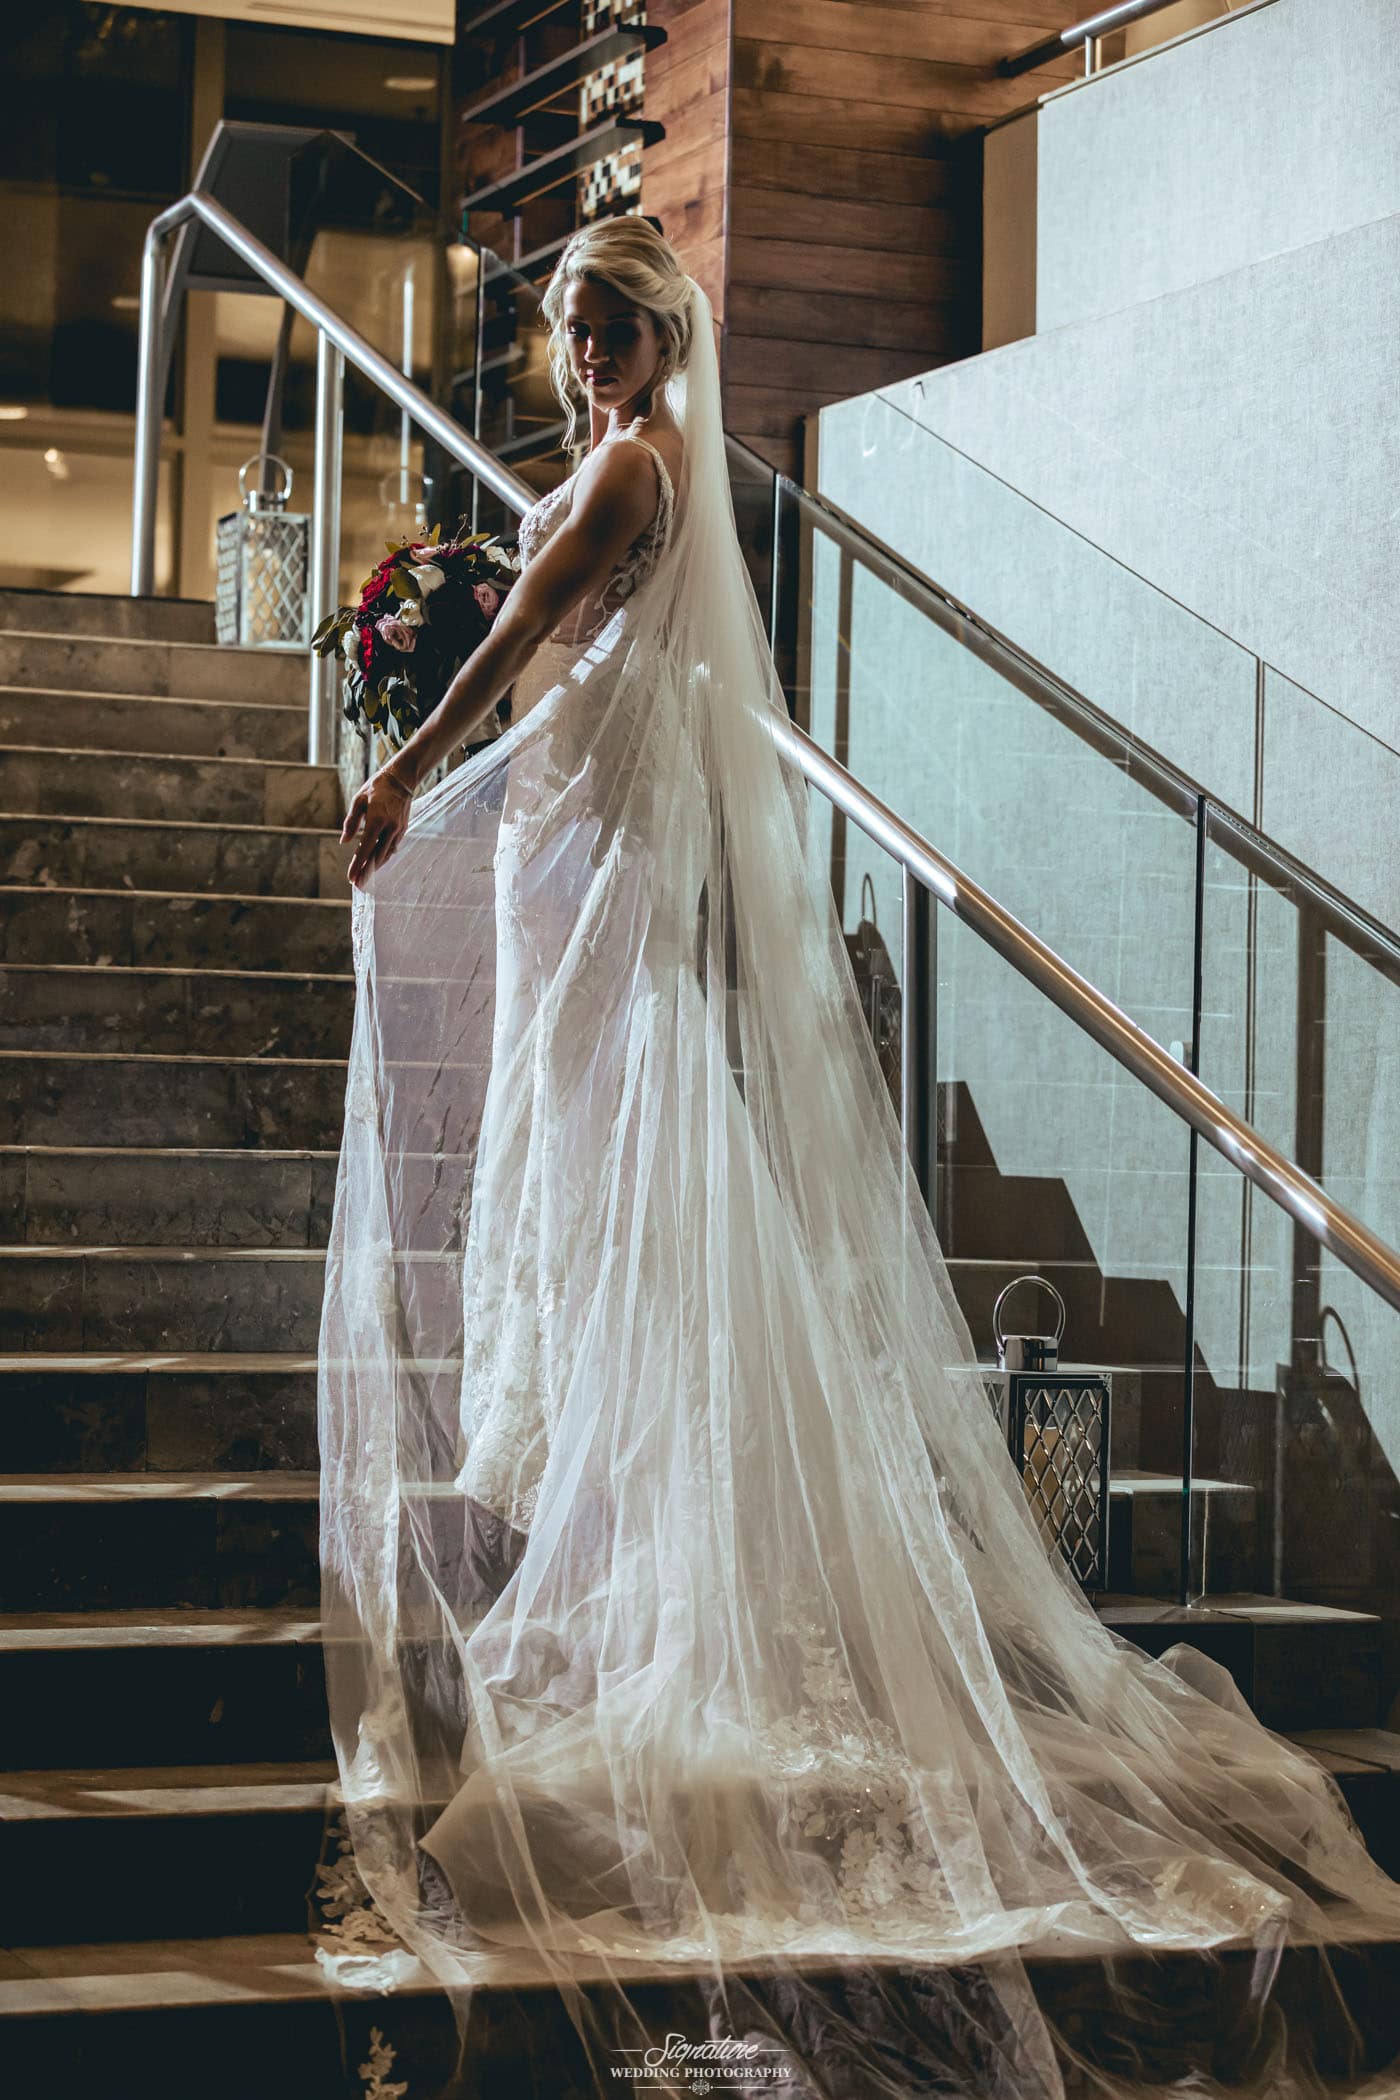 Back of bride's dress and veil on stairs